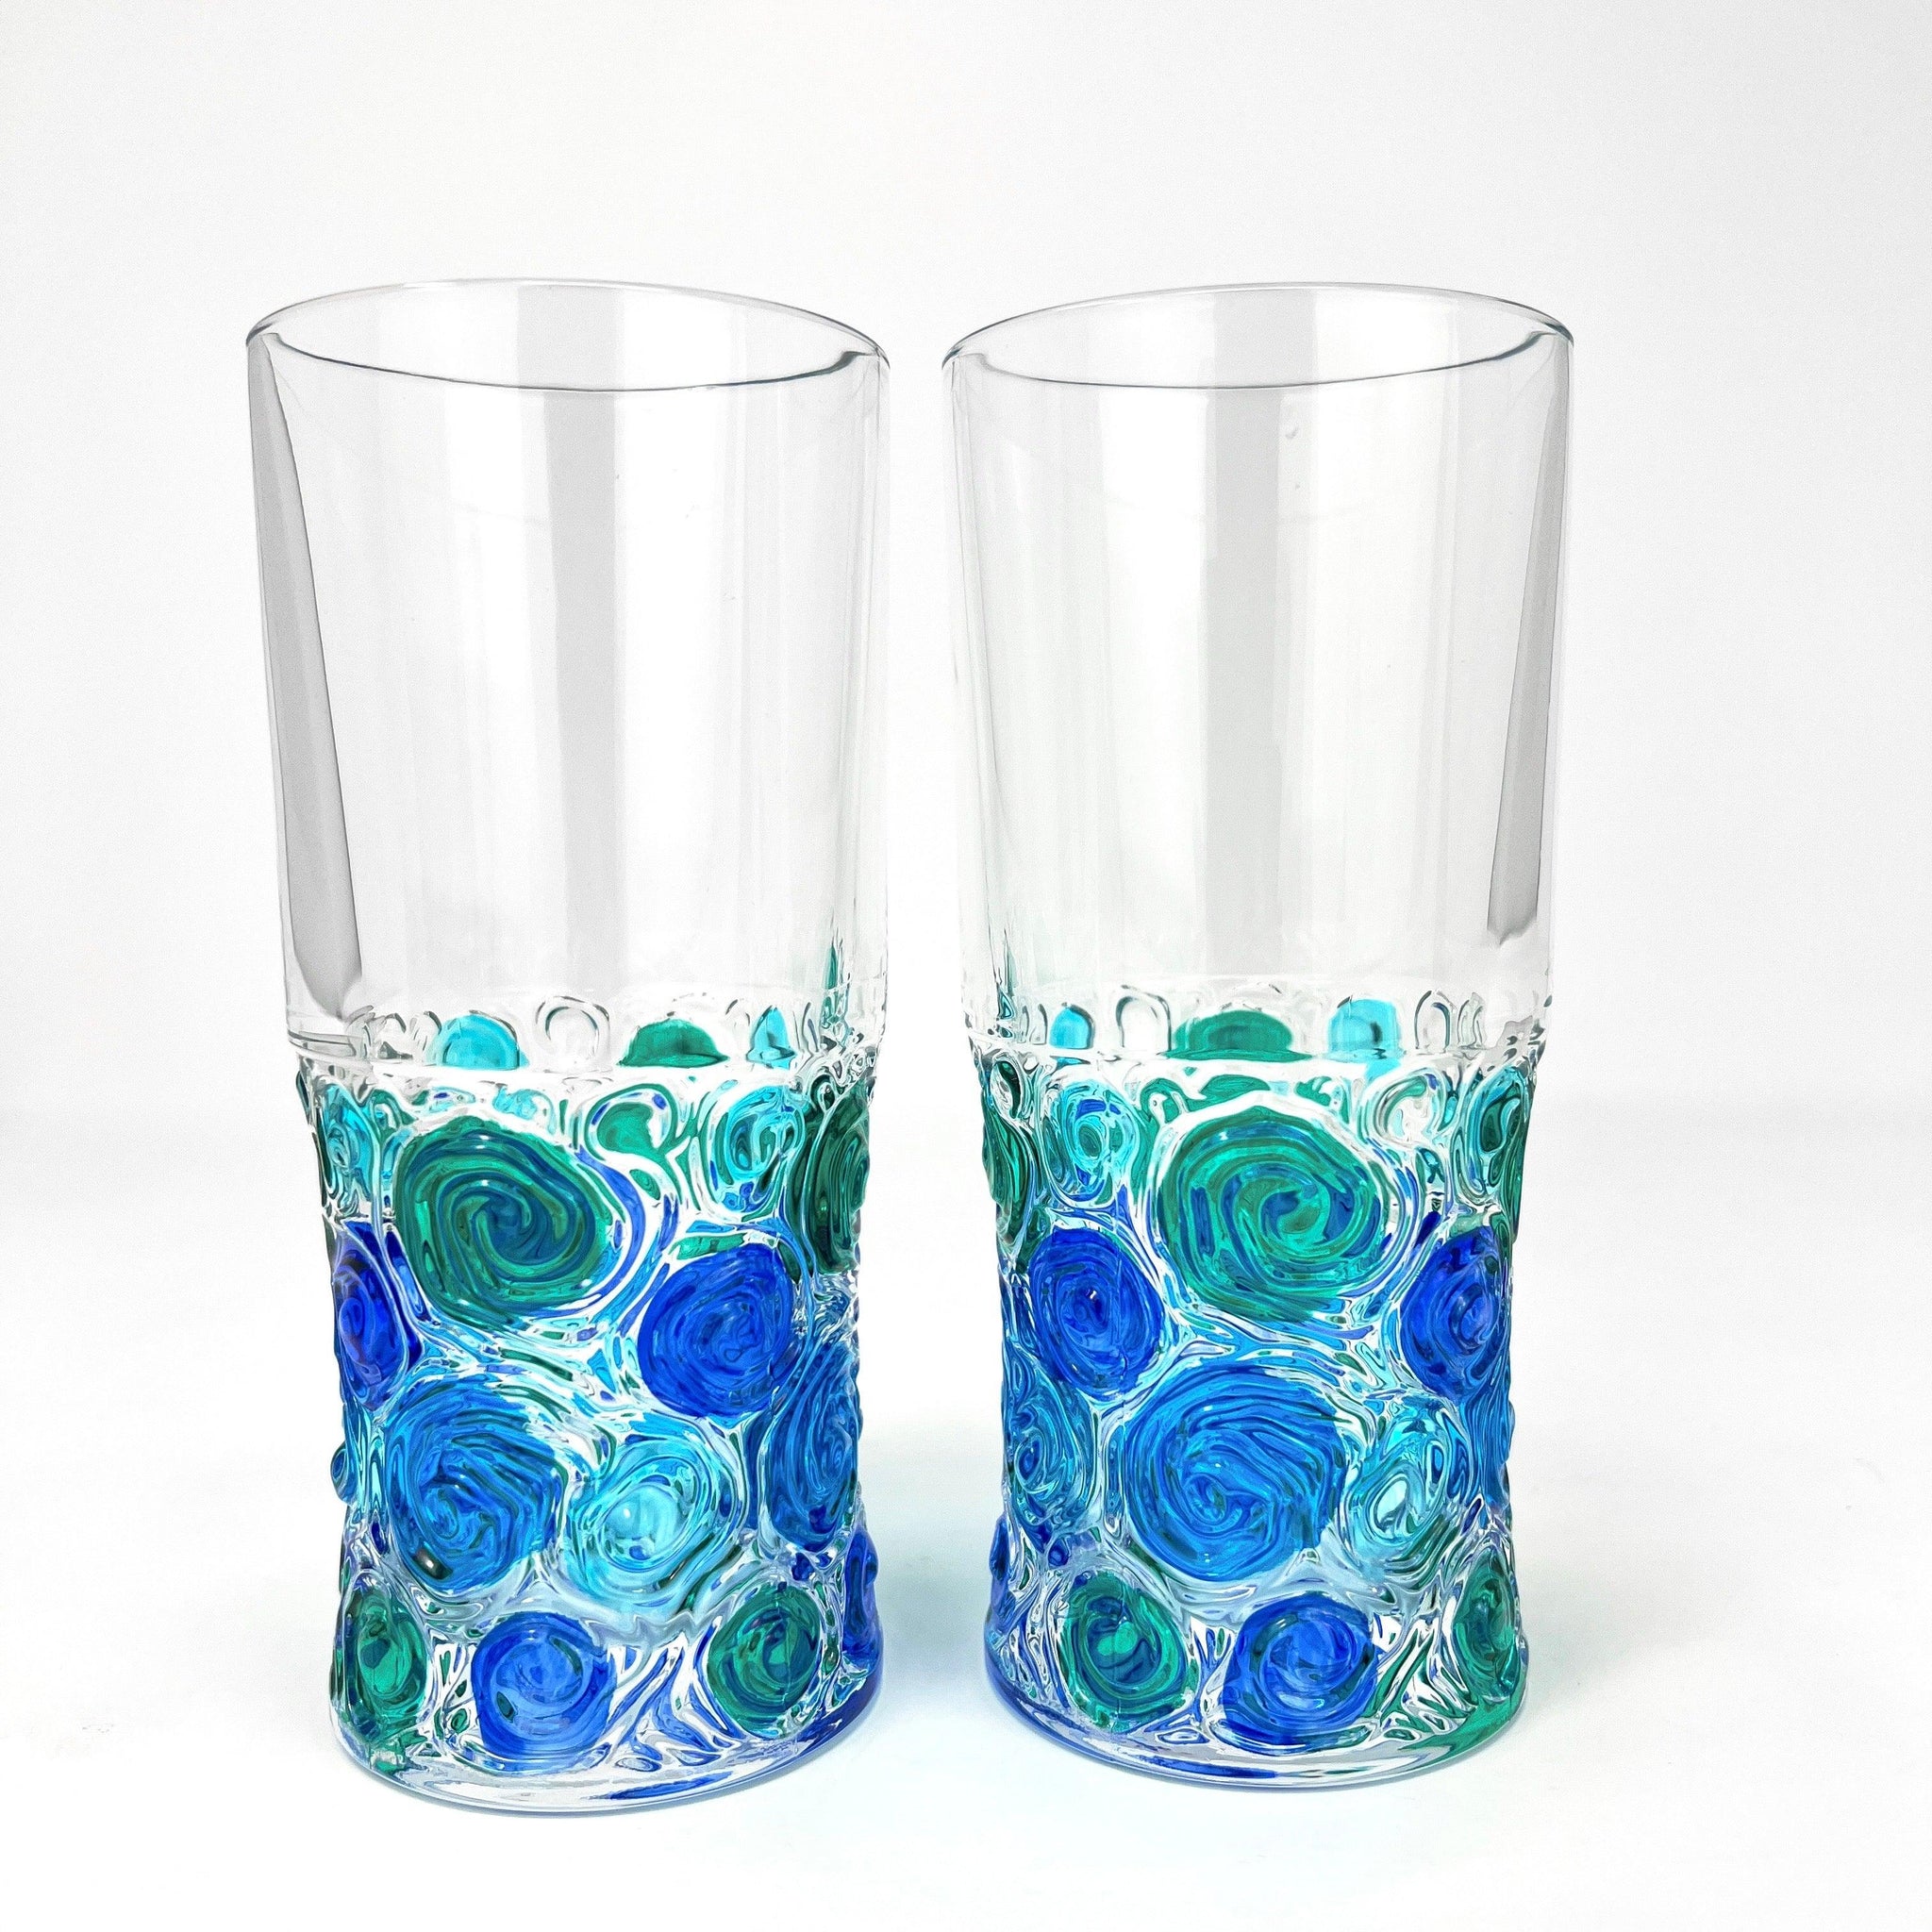 Starry Night Tall Drink Glasses, Set of 2, Made in Italy